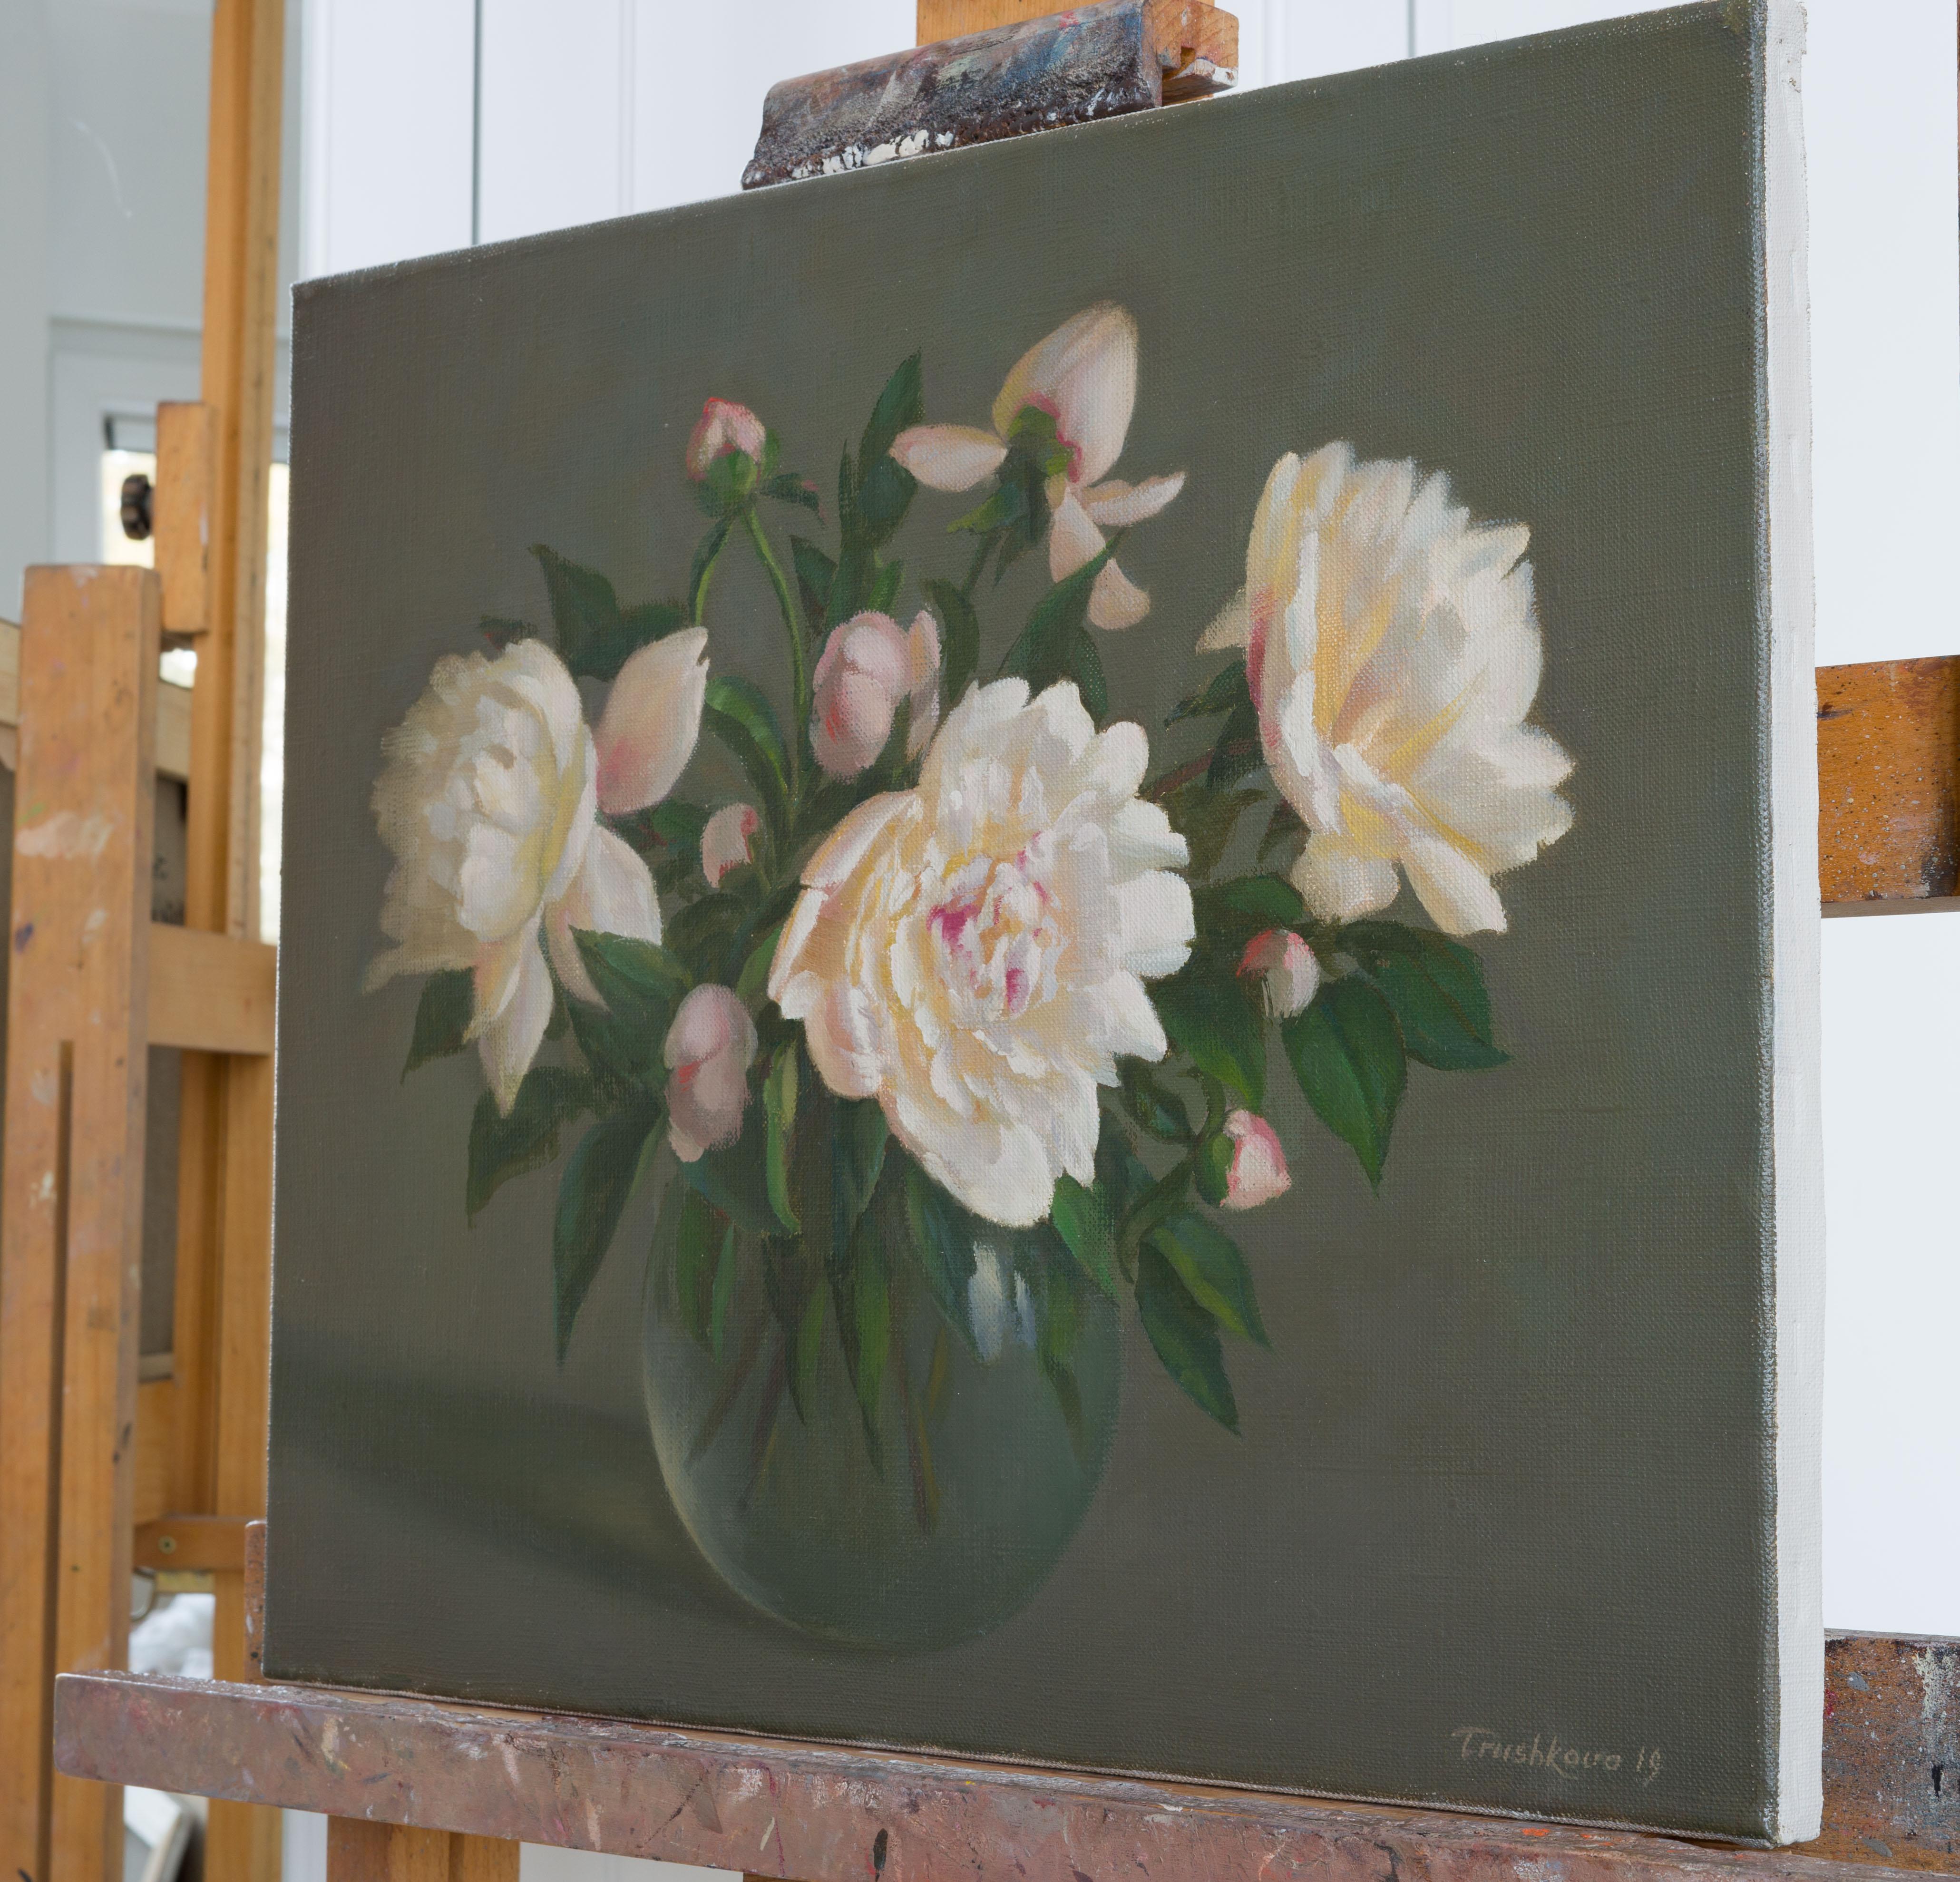 The contrast of the white against the dark background and subtle light on peonies attracted me together with the focus on color harmony. The style of the painting is inspired by the Holland masters of the 17th century. The medium used is oil on